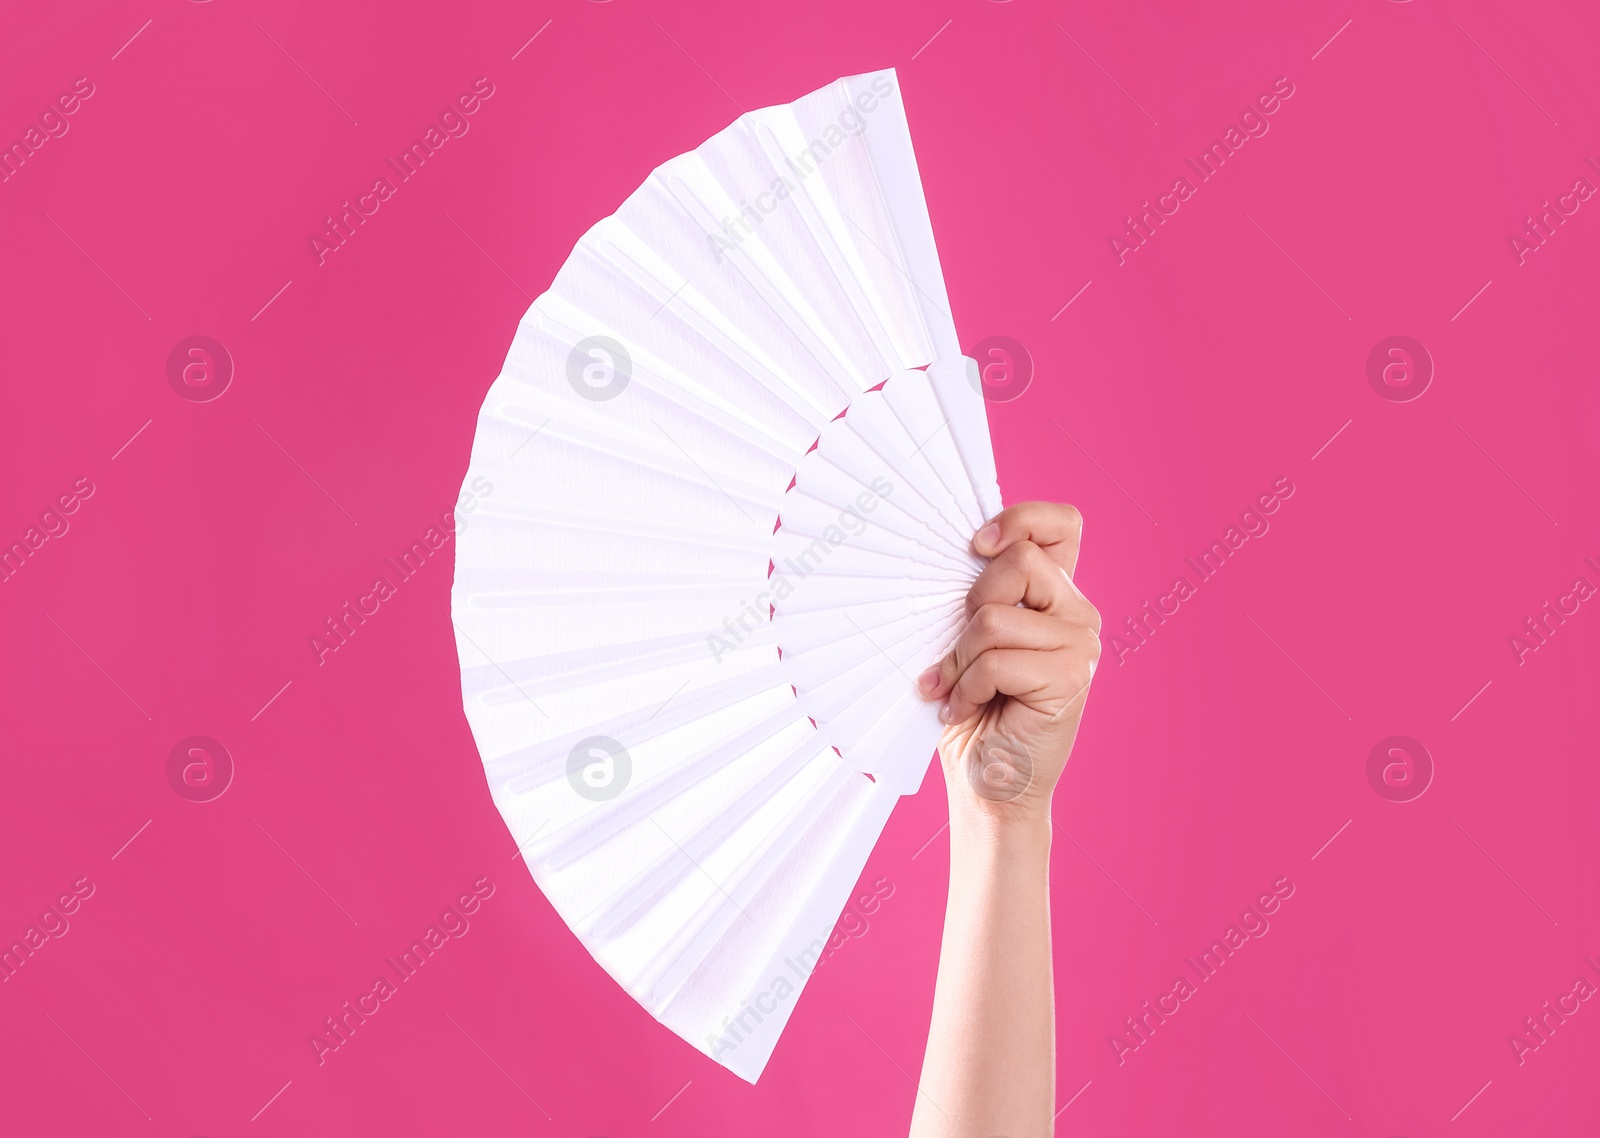 Photo of Woman holding white hand fan on pink background, closeup